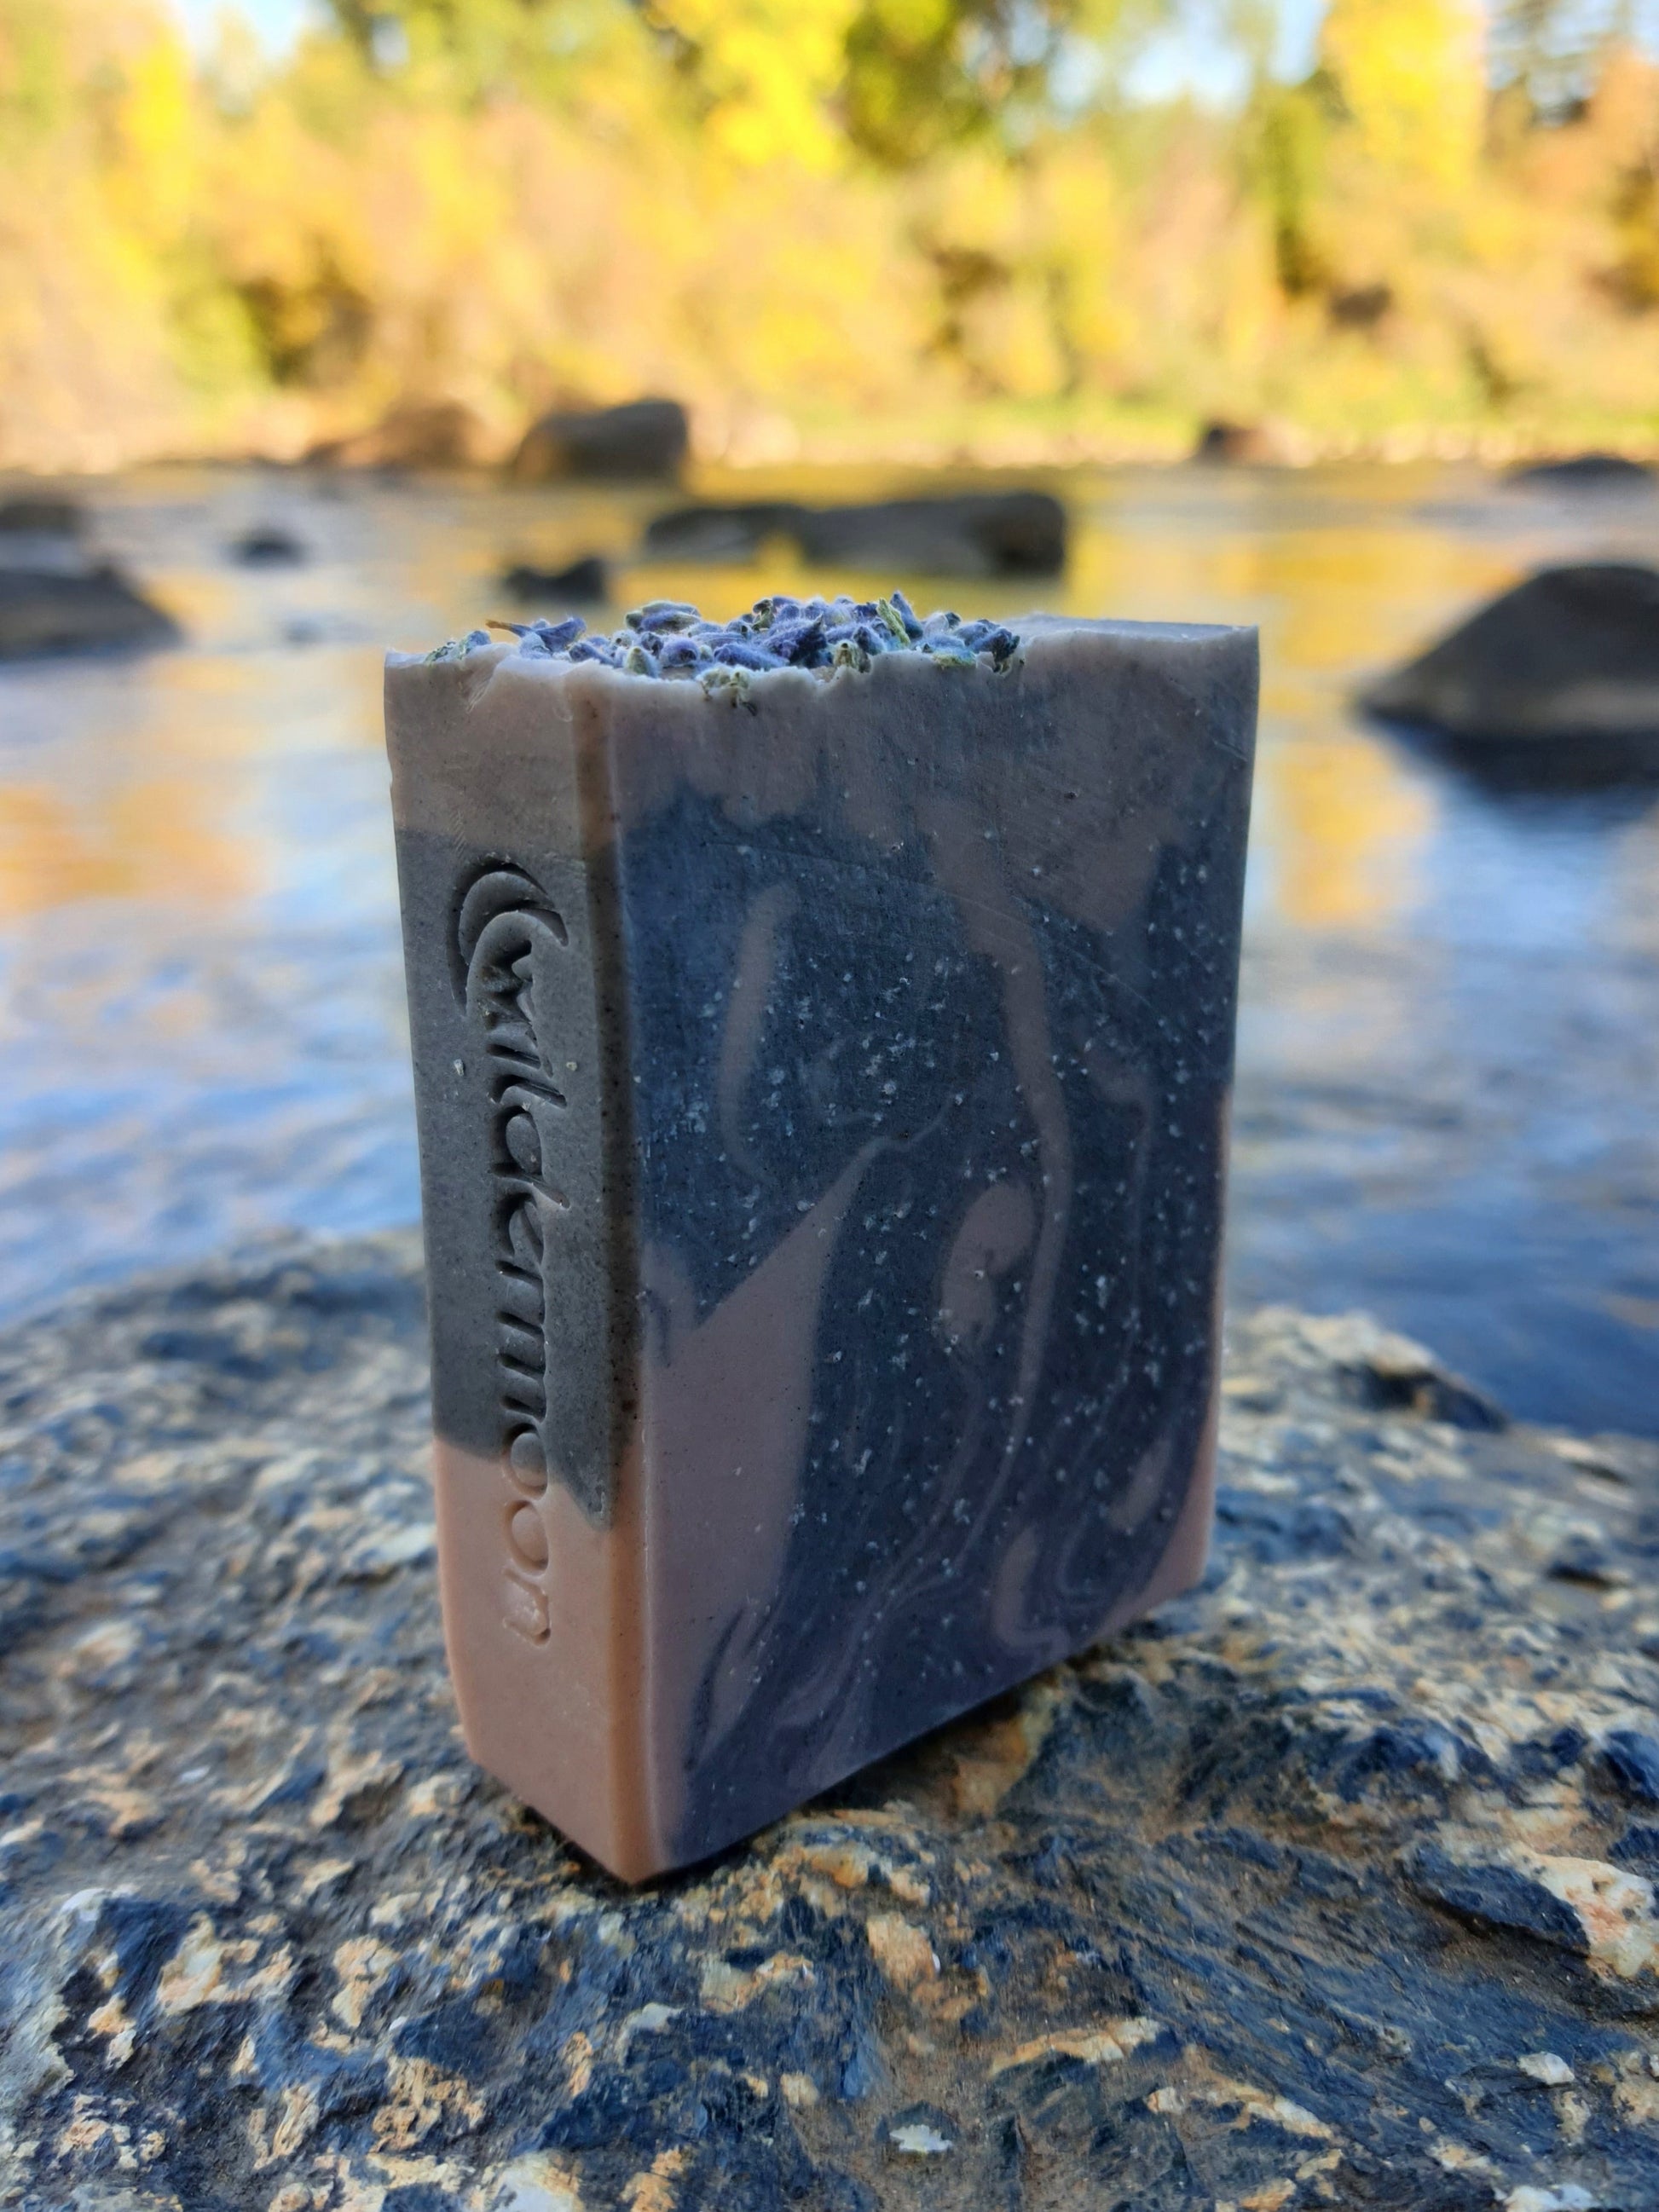 Lavender artisan soap with locally-sourced lavender essential oil. Rectangular bar soap with dark and light purple swirls with lavender buds on top and wildermoon logo stamp on side.